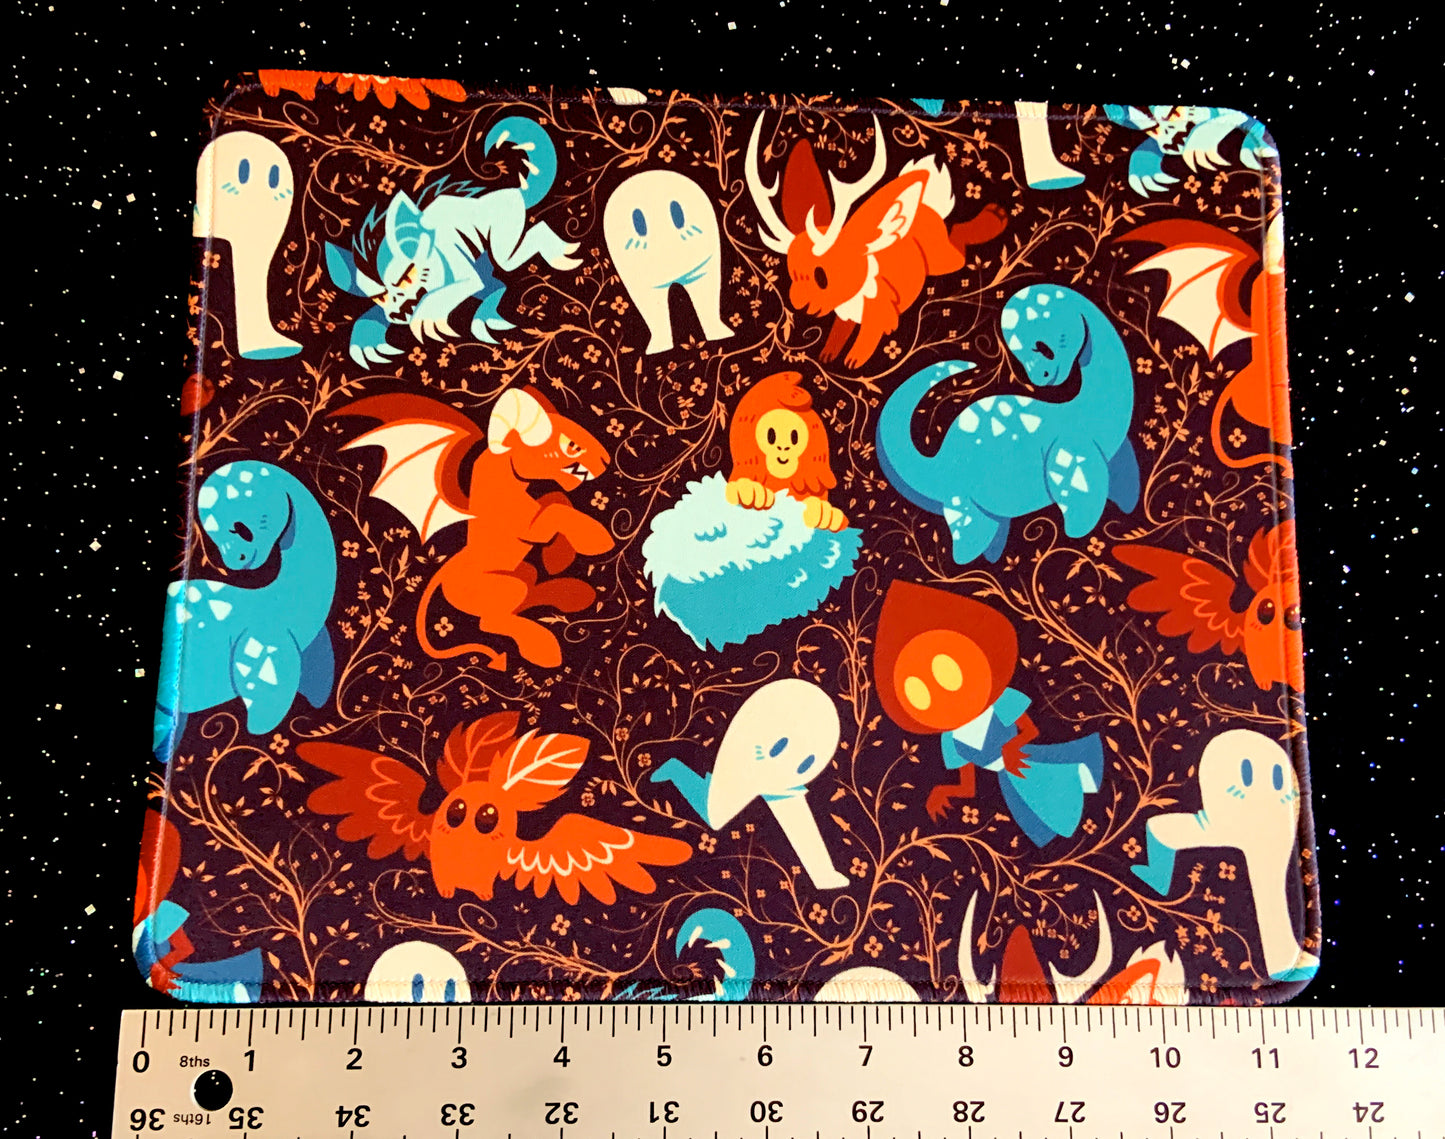 Colorful Cryptids Mousepad